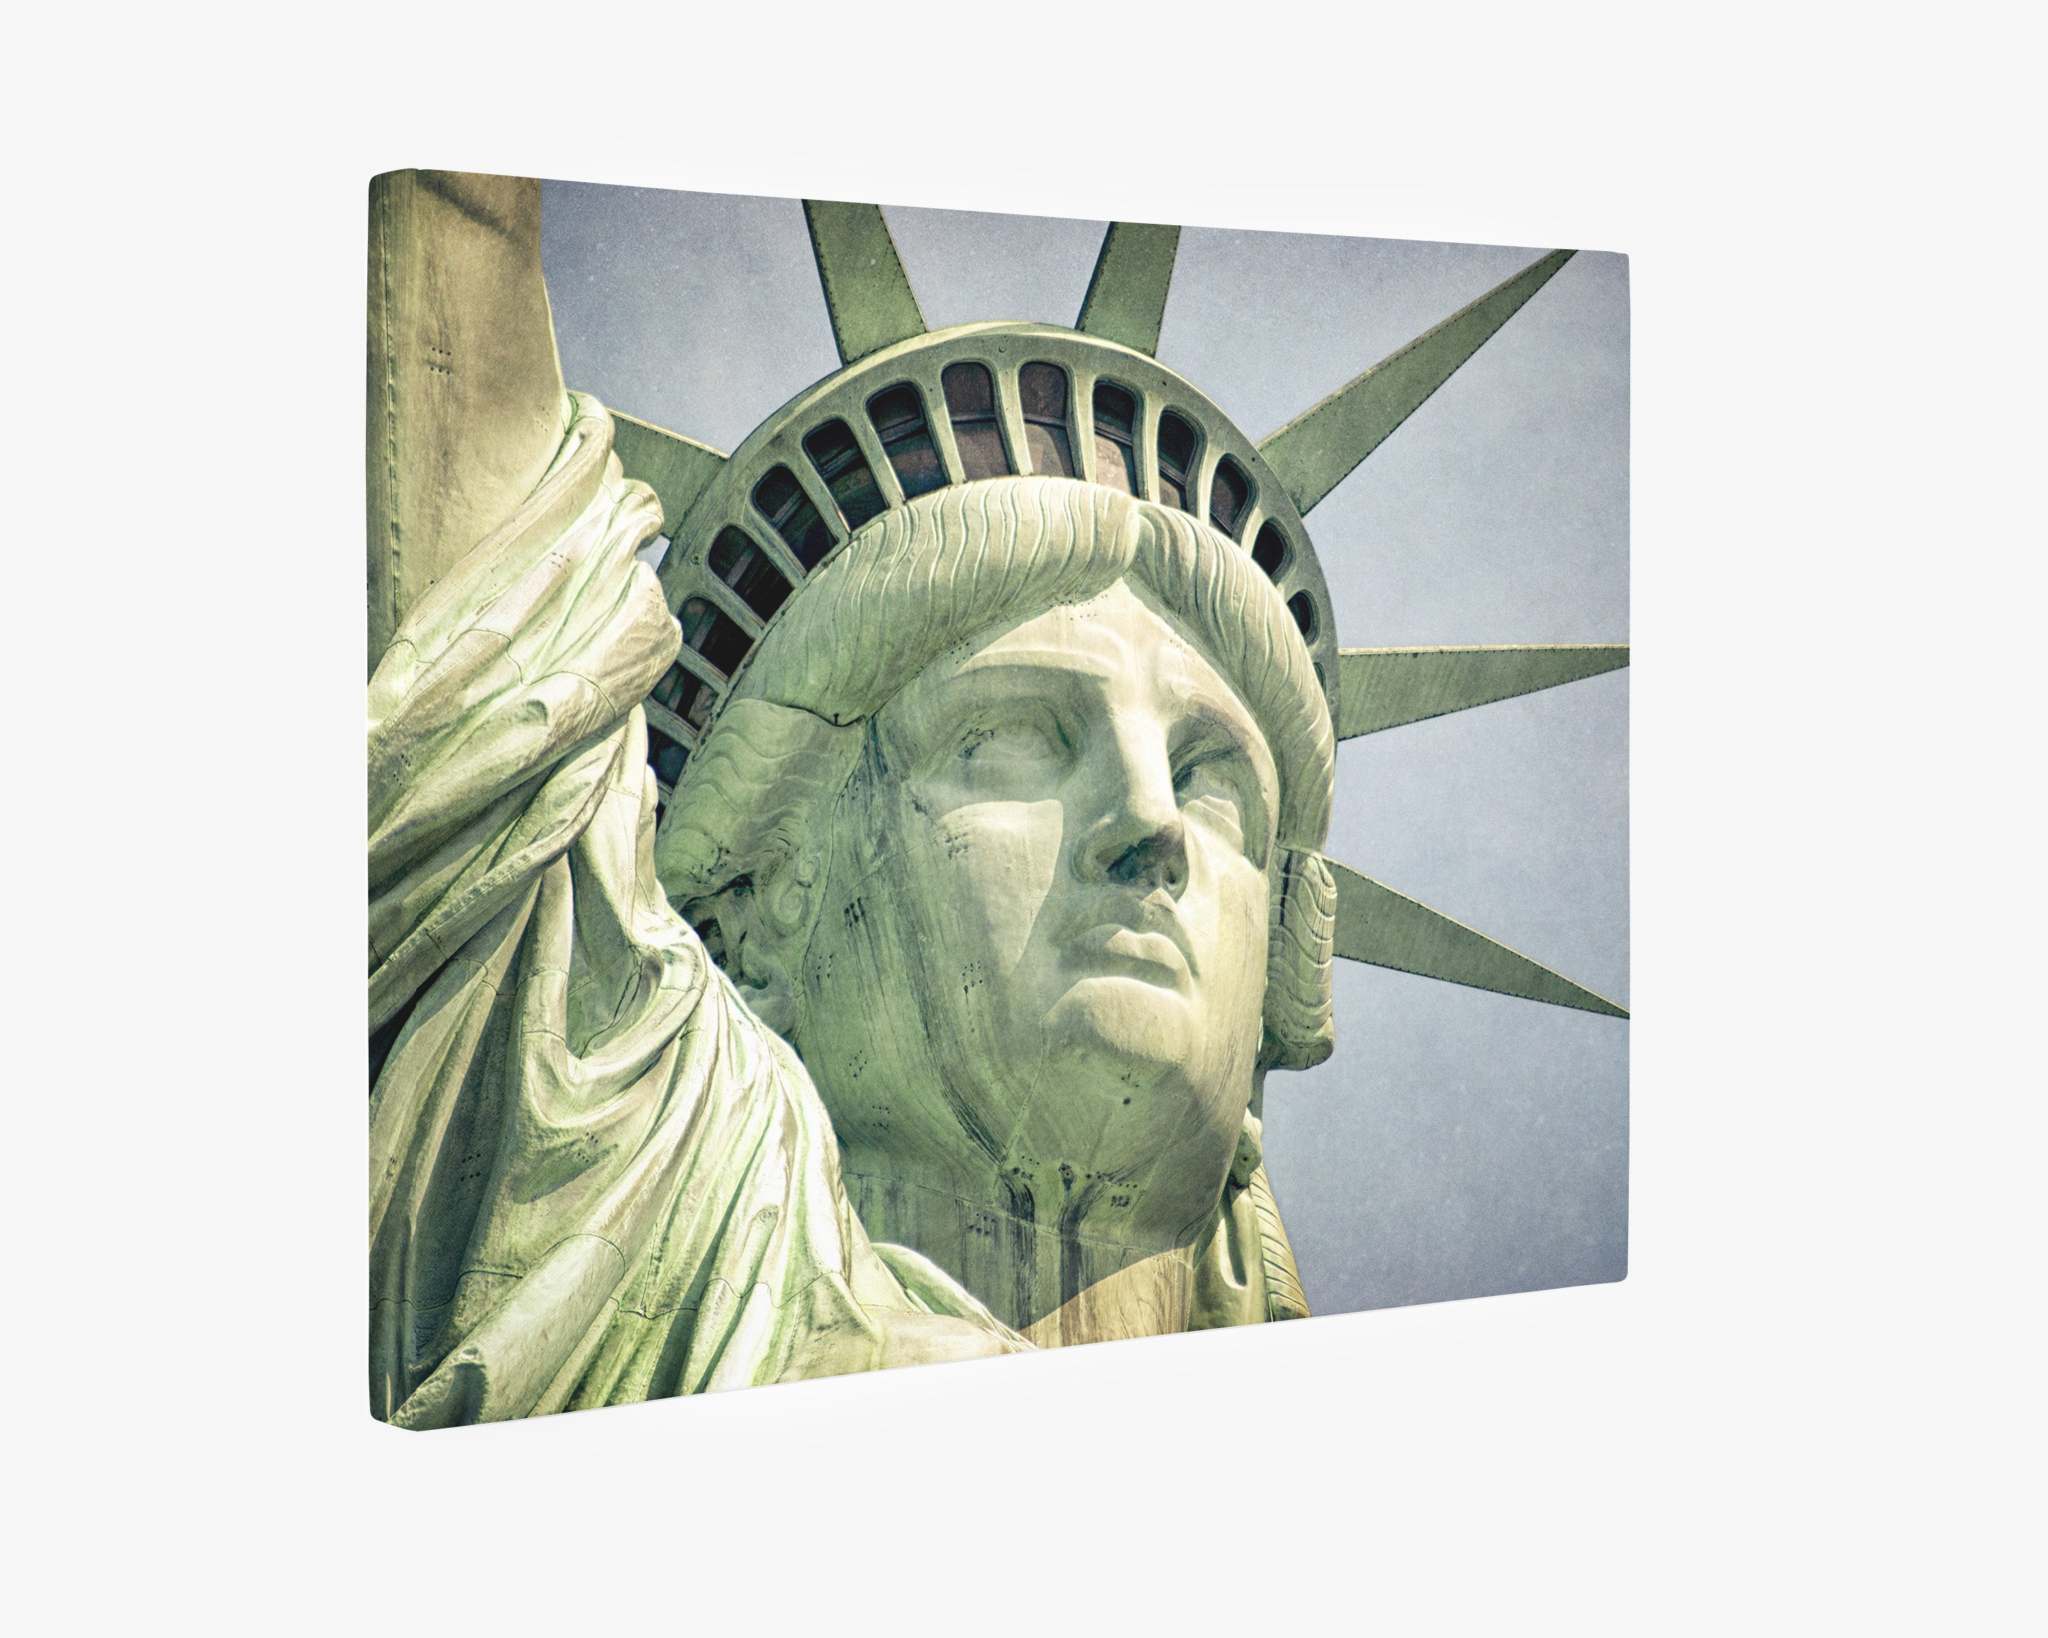 Close-up shot of the upper part of the Statue of Liberty against a cloudy sky. The image captures details of the statue's face, crown, and the rays extending from it. The statue is greenish due to oxidation of its copper surface. Available as a canvas gallery wrap on premium artist-grade canvas.

Introducing New York City Canvas Wall Art, 'Face of Liberty' by Offley Green.